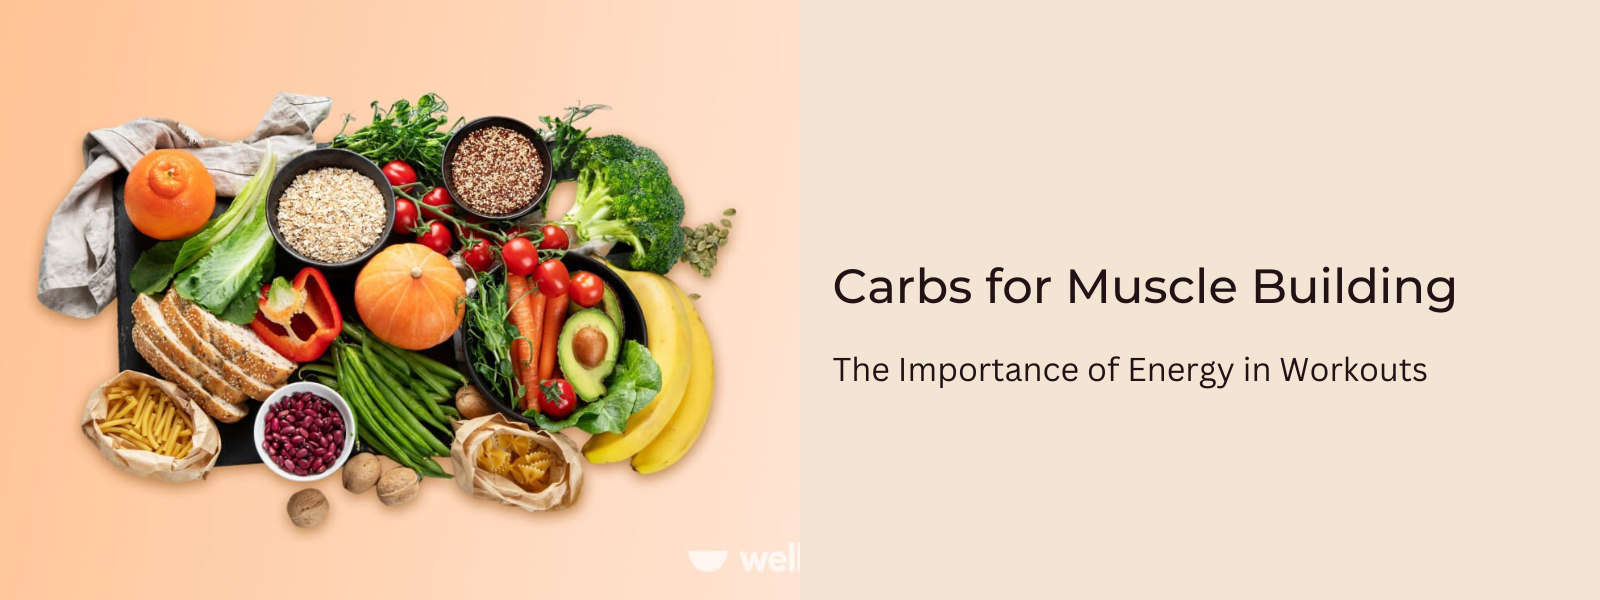 Carbs for Muscle Building: The Importance of Energy in Workouts